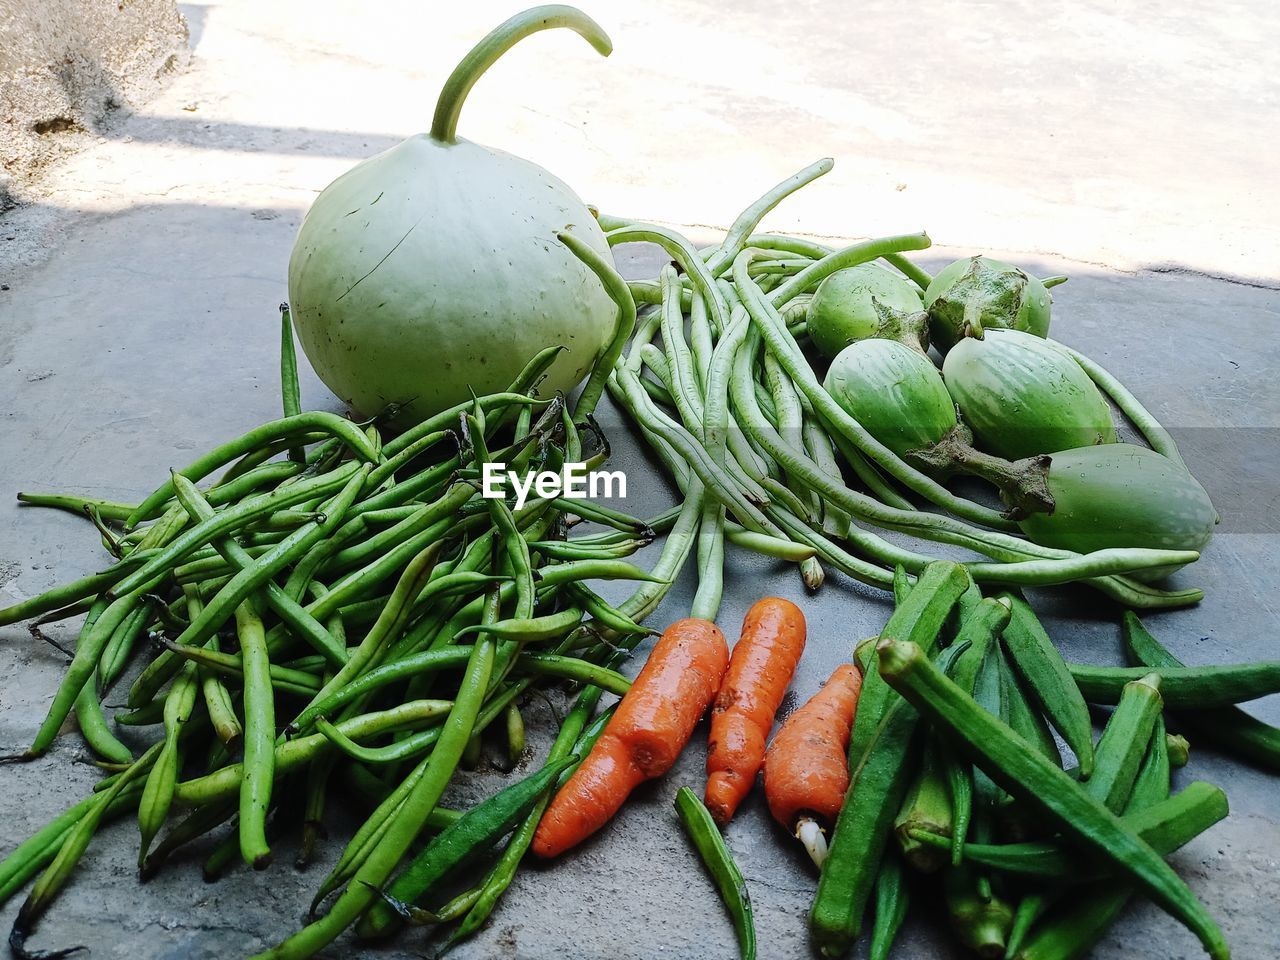 HIGH ANGLE VIEW OF FRESH VEGETABLES